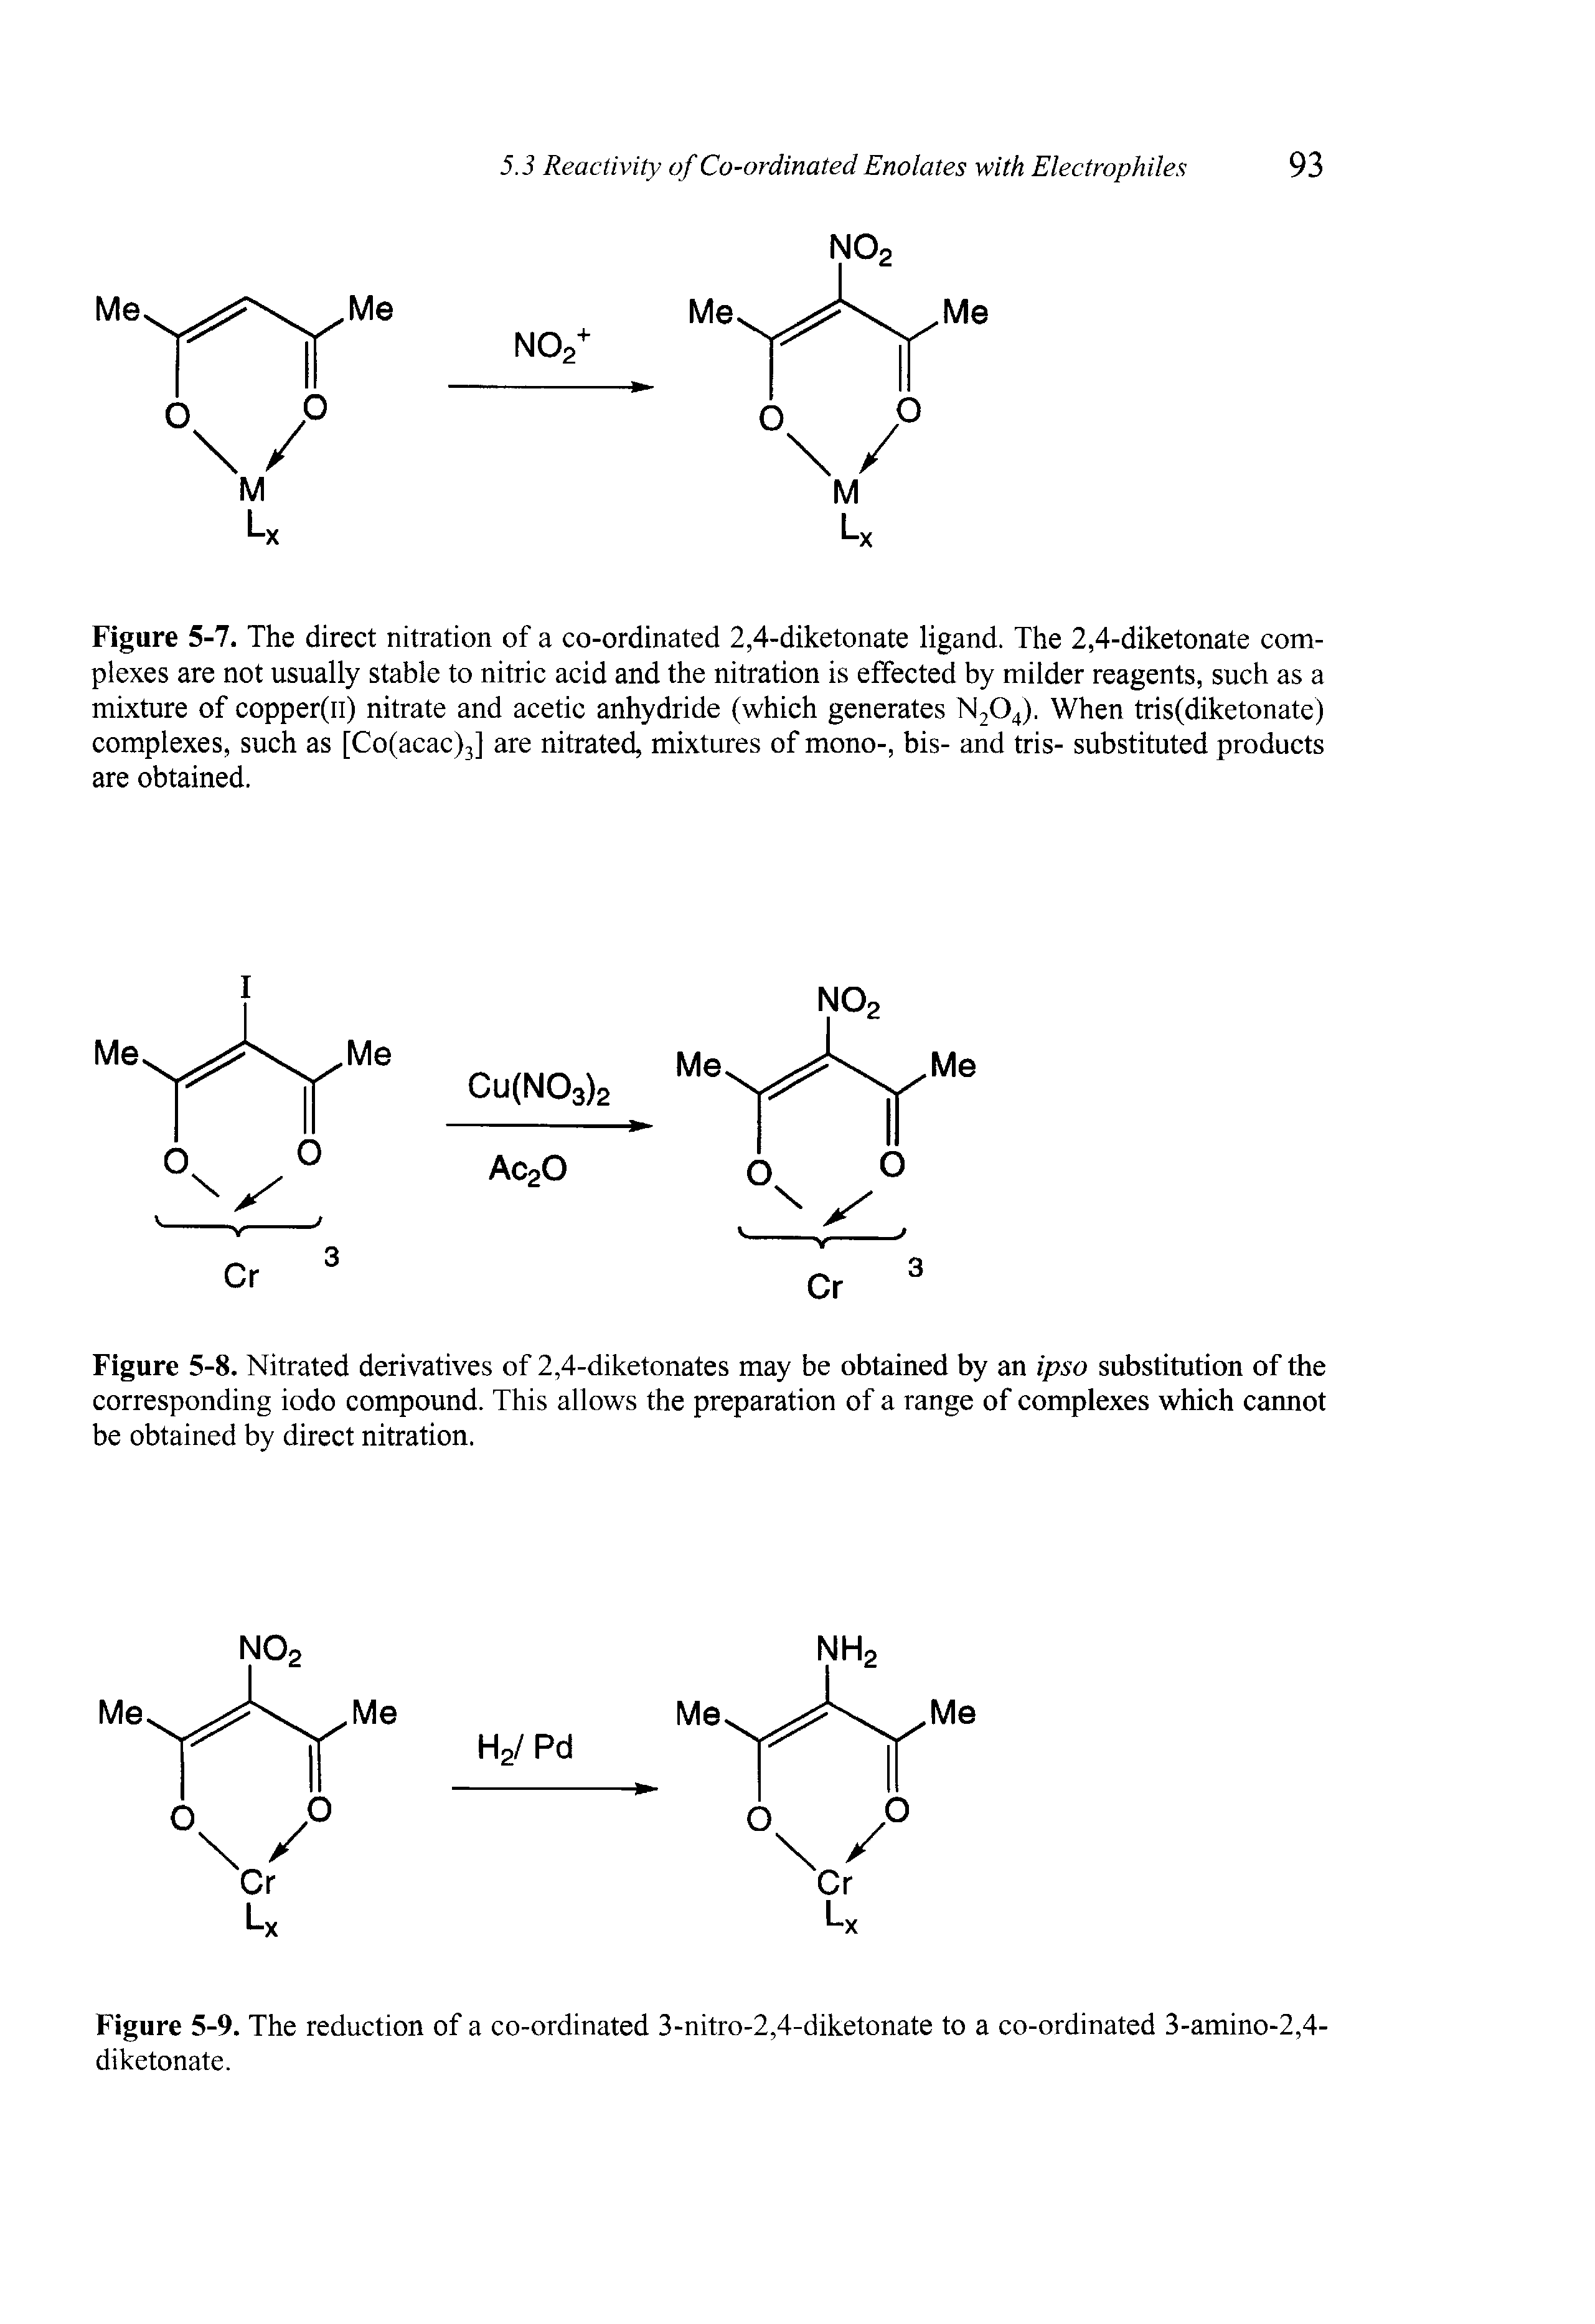 Figure 5-7. The direct nitration of a co-ordinated 2,4-diketonate ligand. The 2,4-diketonate complexes are not usually stable to nitric acid and the nitration is effected by milder reagents, such as a mixture of copper(n) nitrate and acetic anhydride (which generates N204). When tris(diketonate) complexes, such as [Co(acac)3] are nitrated, mixtures of mono-, bis- and tris- substituted products are obtained.